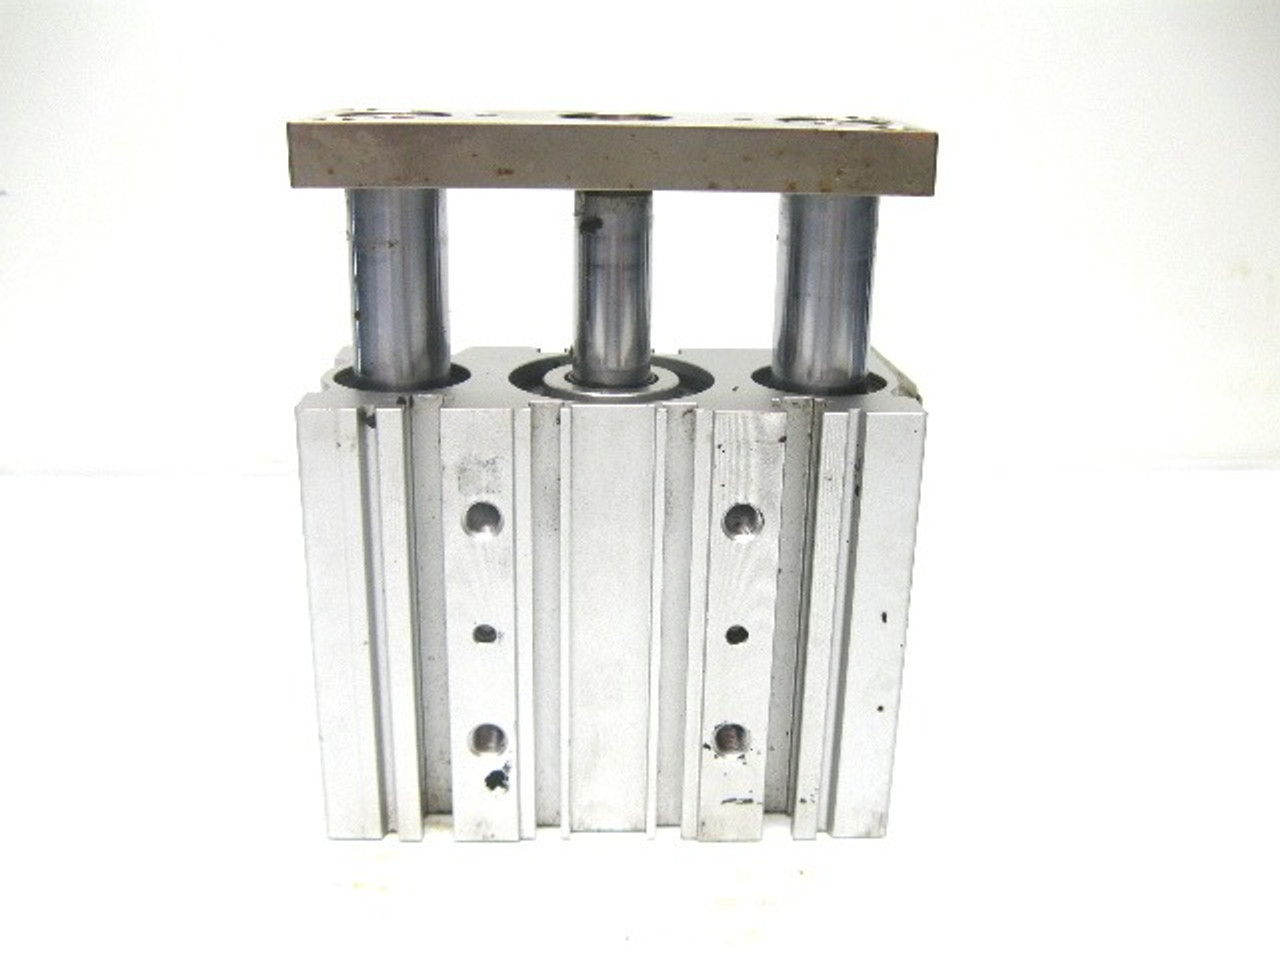 Smc MGPM40-50-Y7BWZ Pneumatic Guide Cylinder 40 MM Bore, 50 MM Stroke